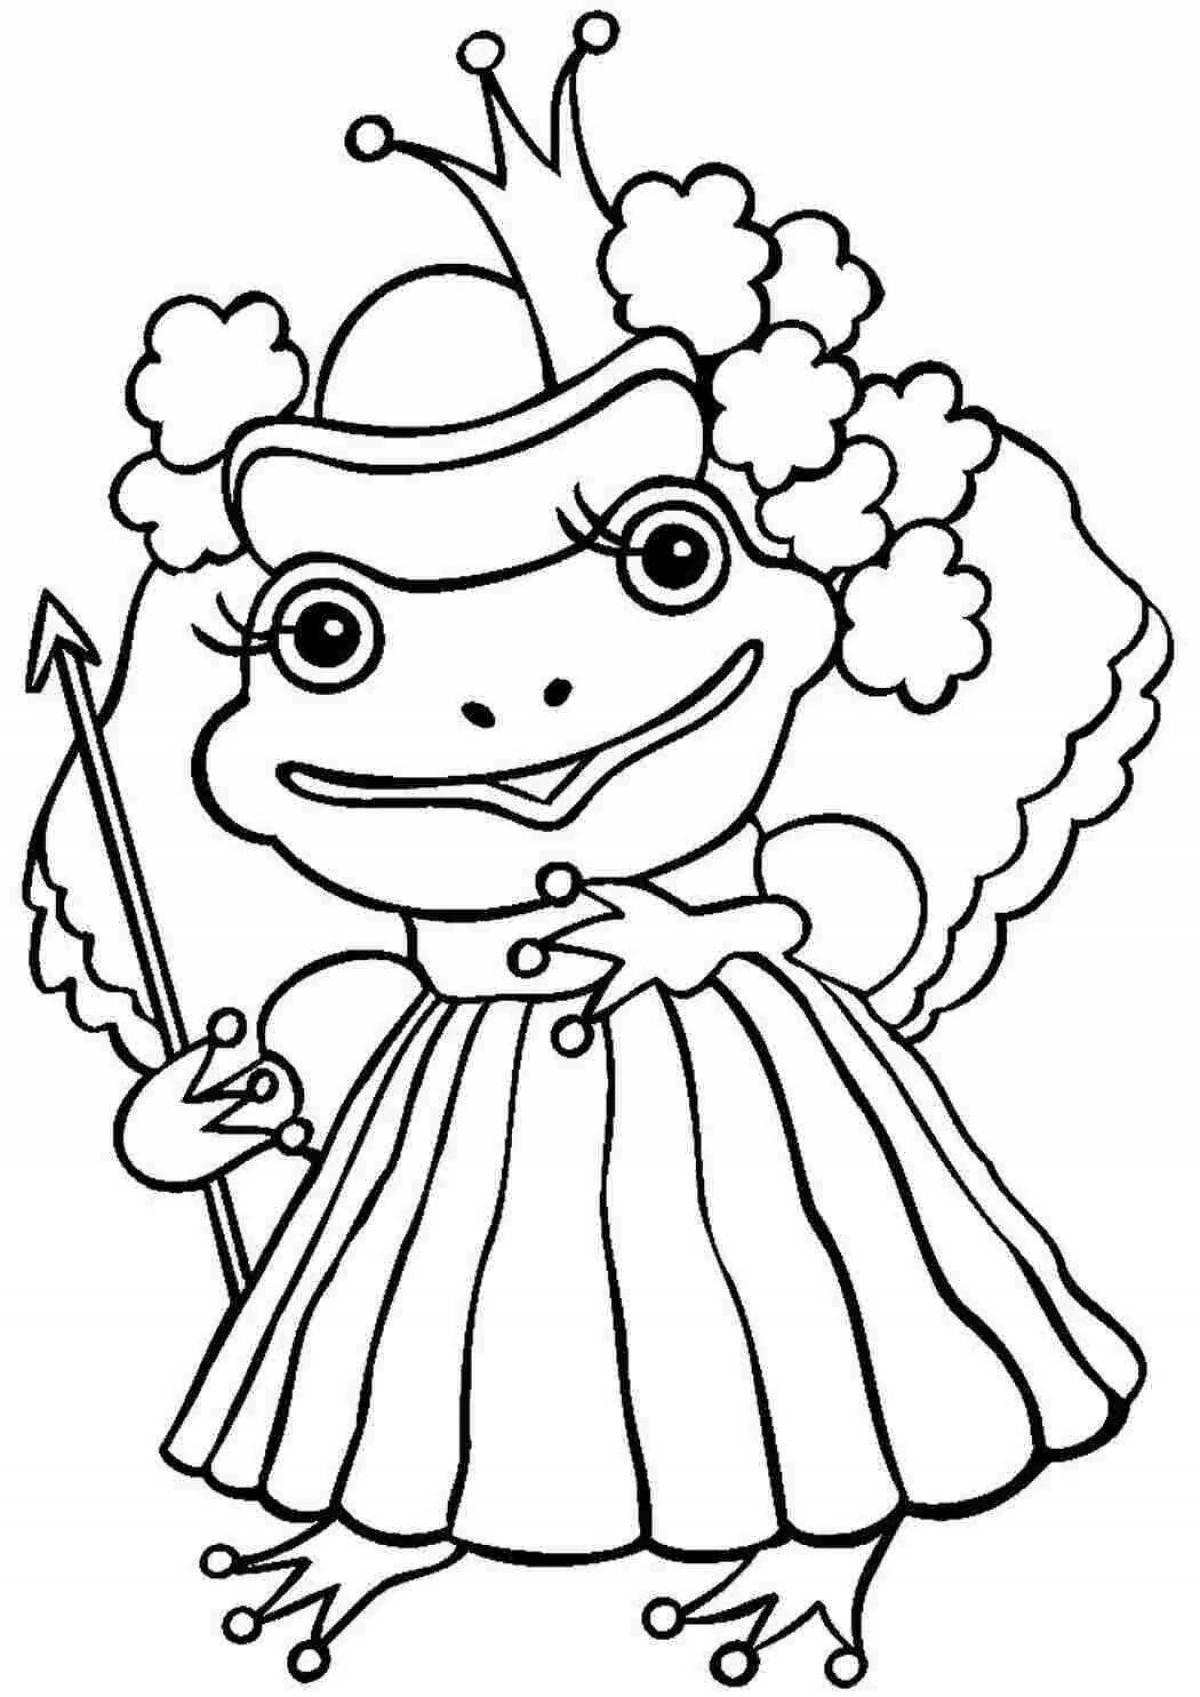 Creative frog princess coloring book for kids